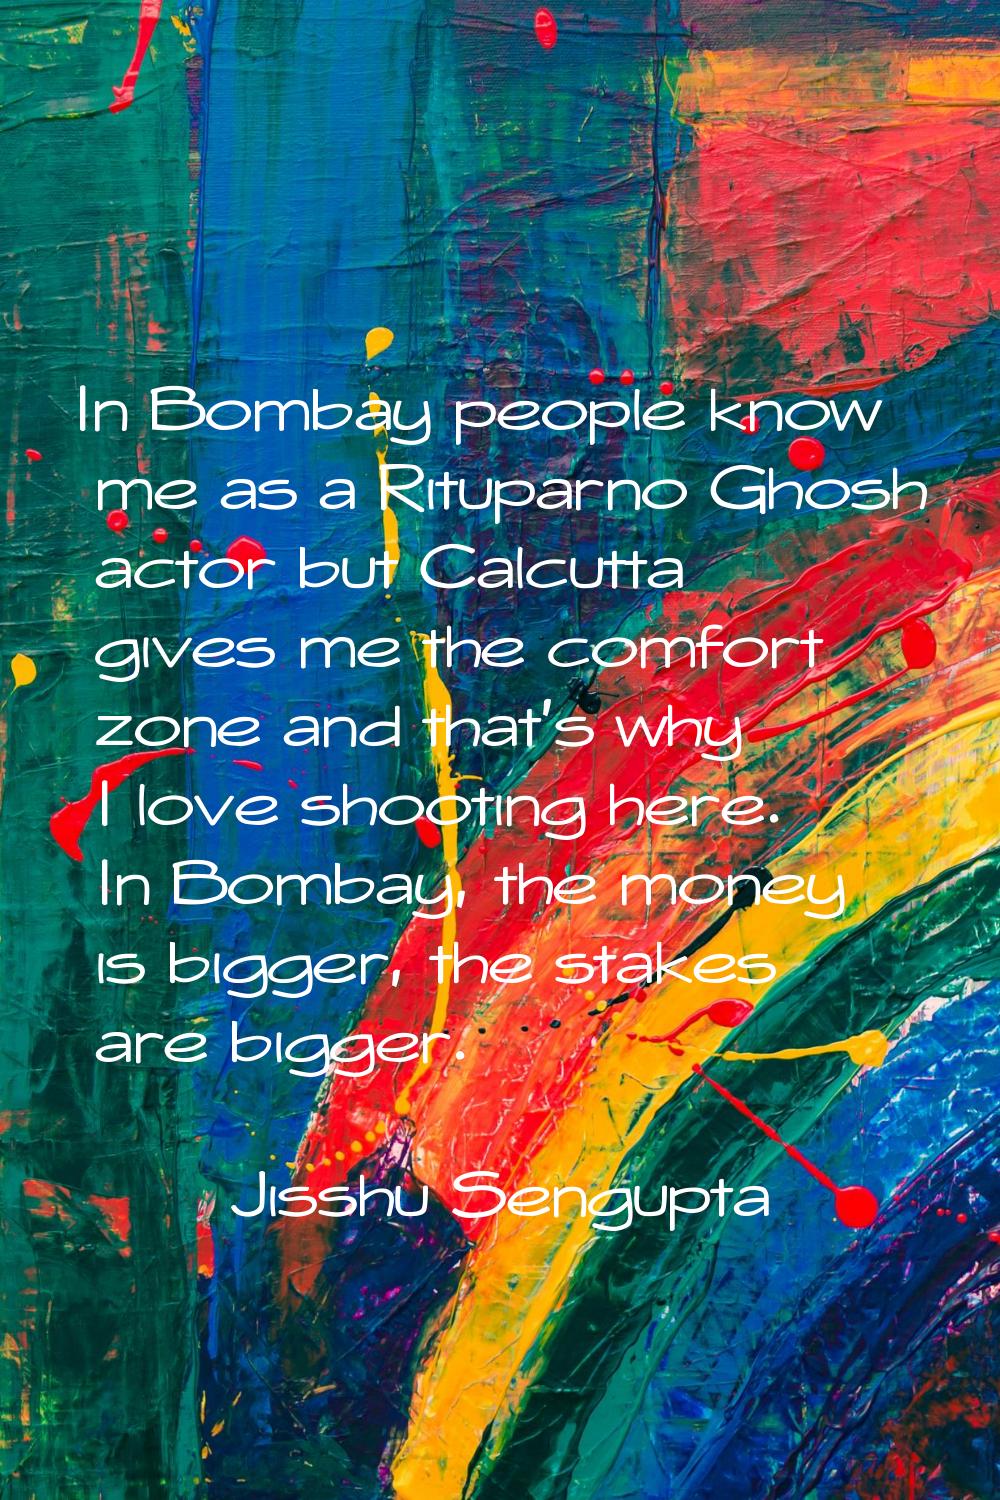 In Bombay people know me as a Rituparno Ghosh actor but Calcutta gives me the comfort zone and that